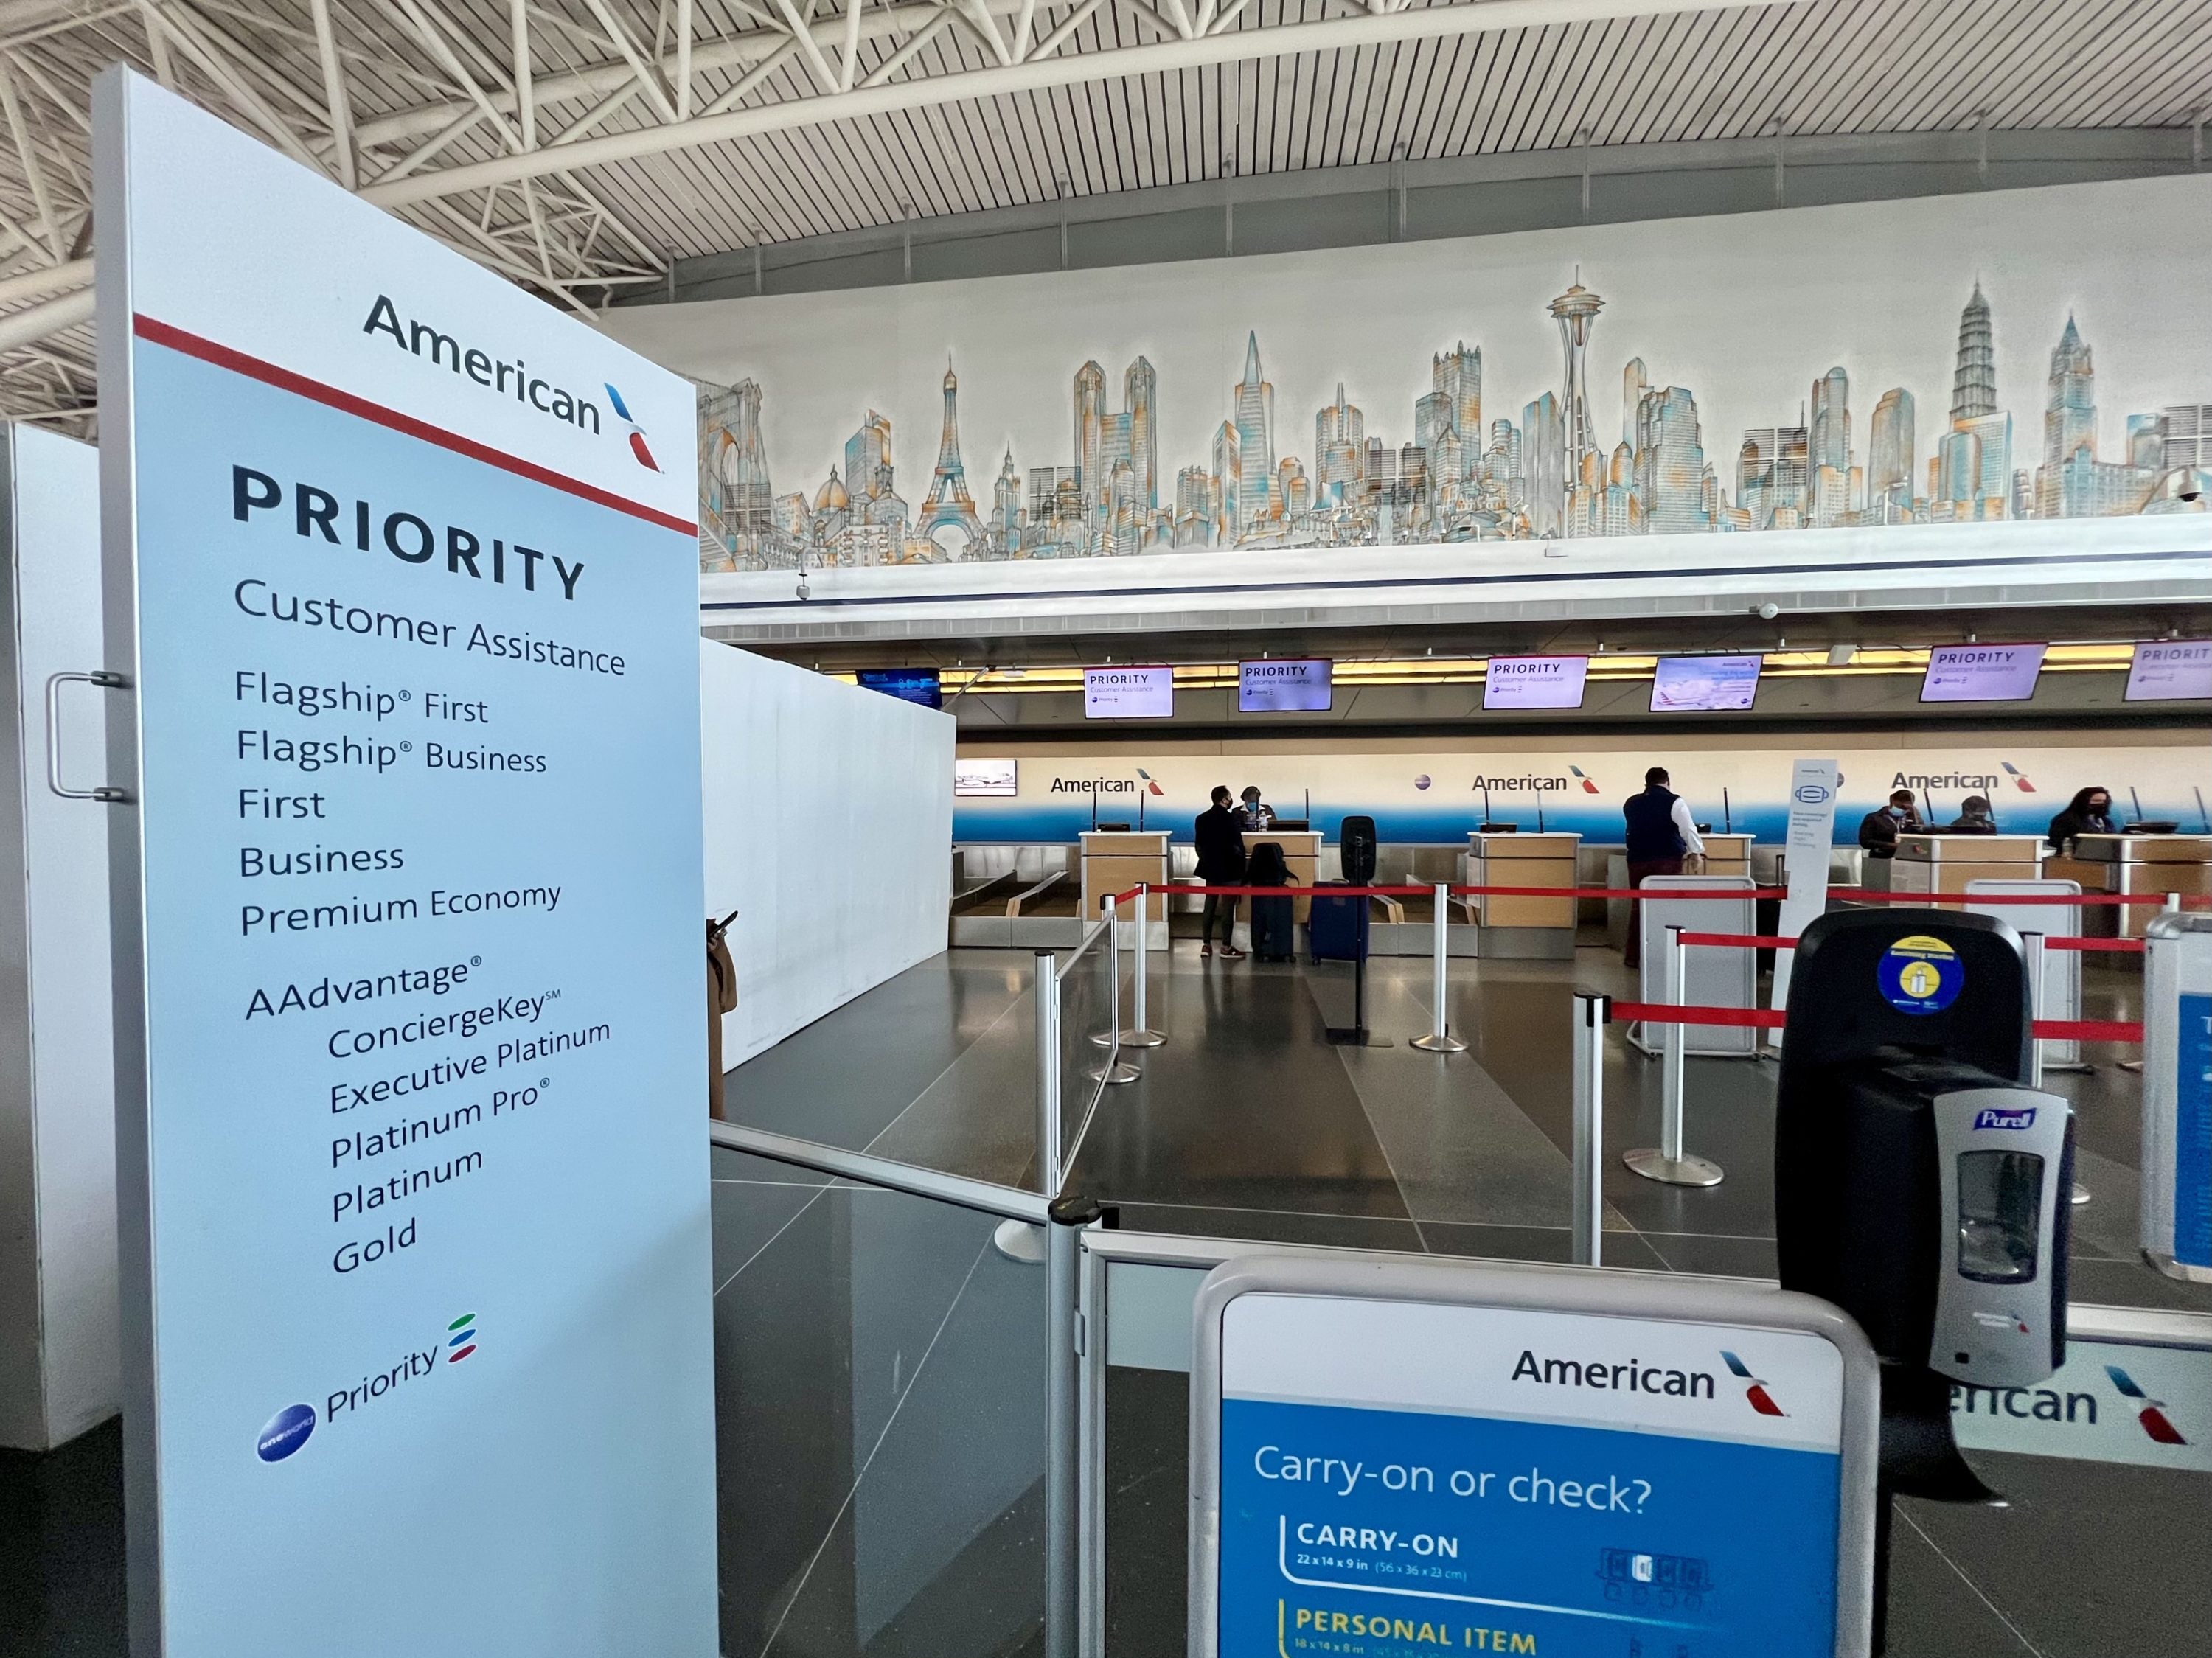 American Airlines Flagship Business JFK priority check in